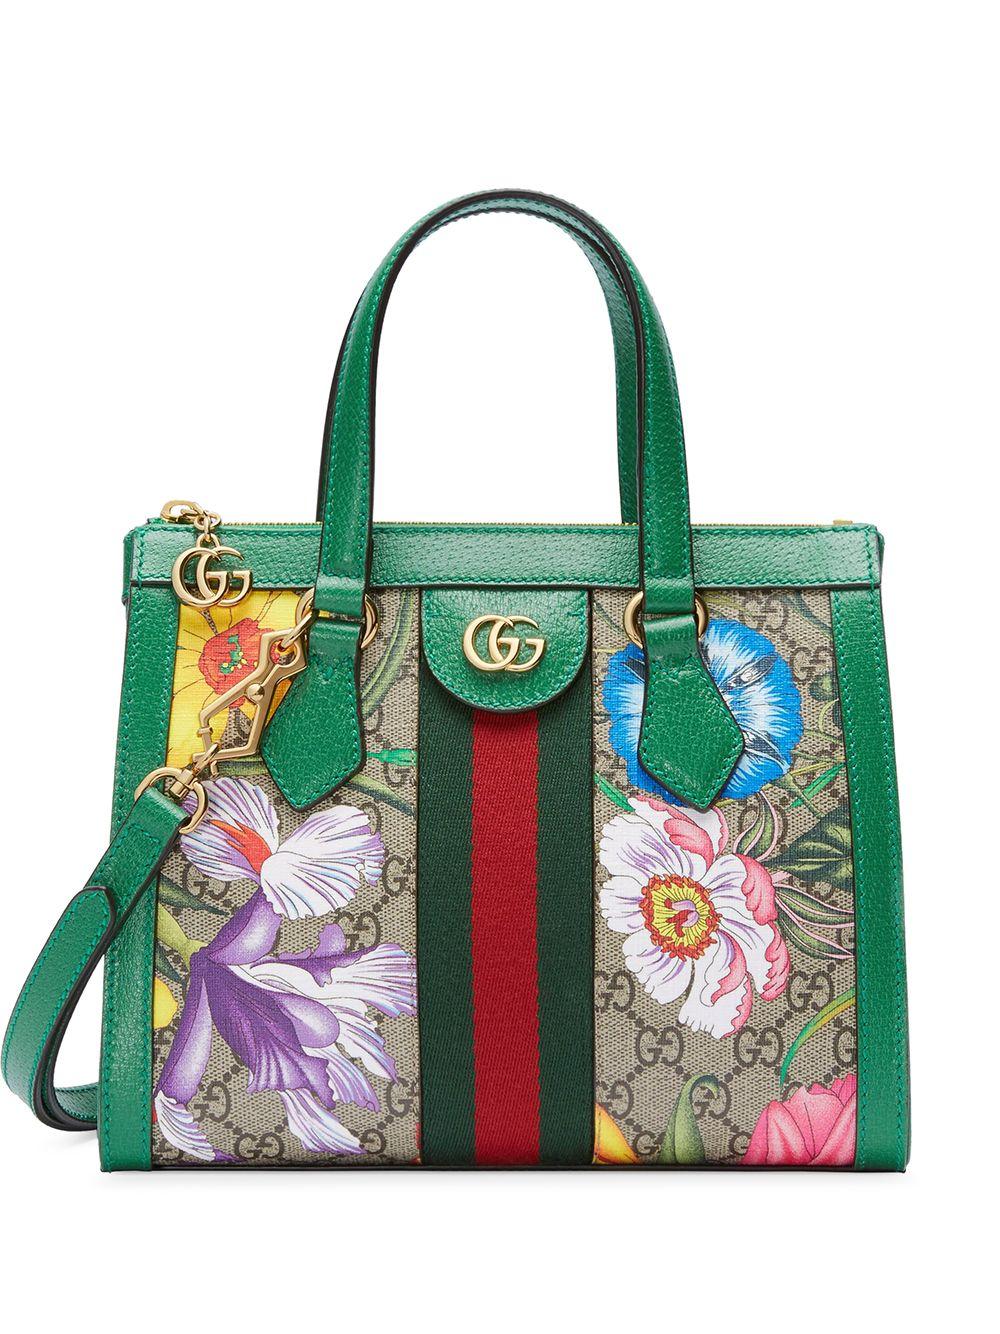 boliger Nominering bifald Gucci Ophidia Floral Pattern Tote Bag in Green | Lyst